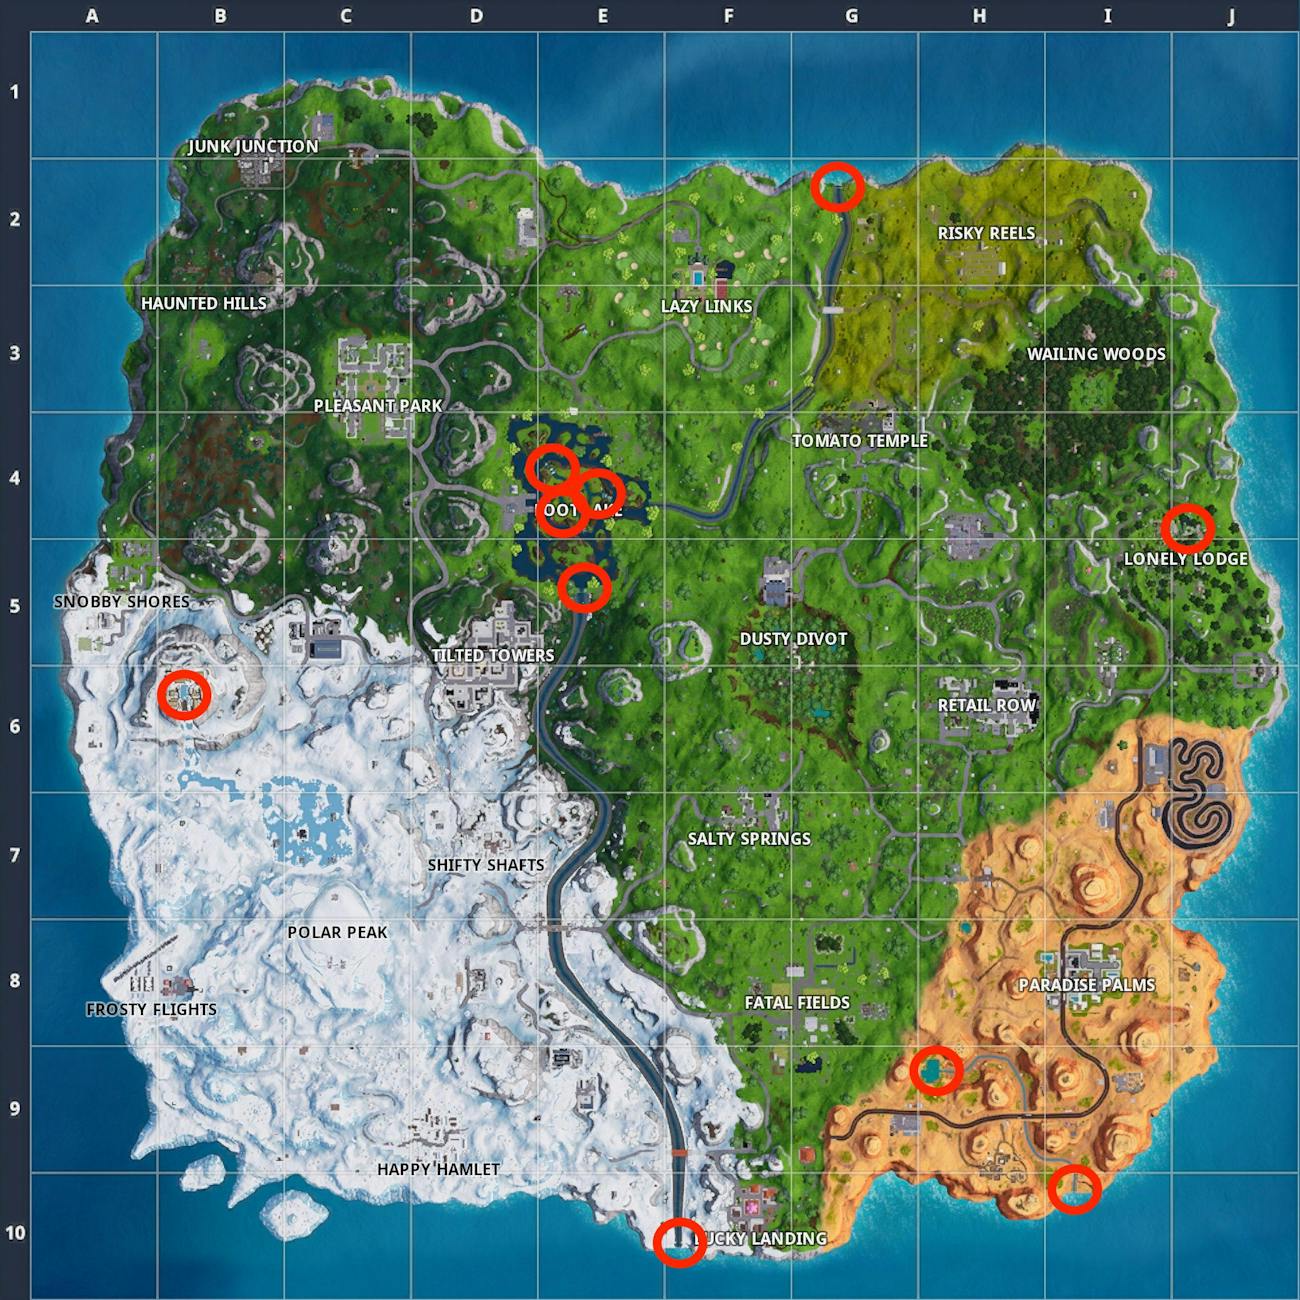 Visit north south east west fortnite locations